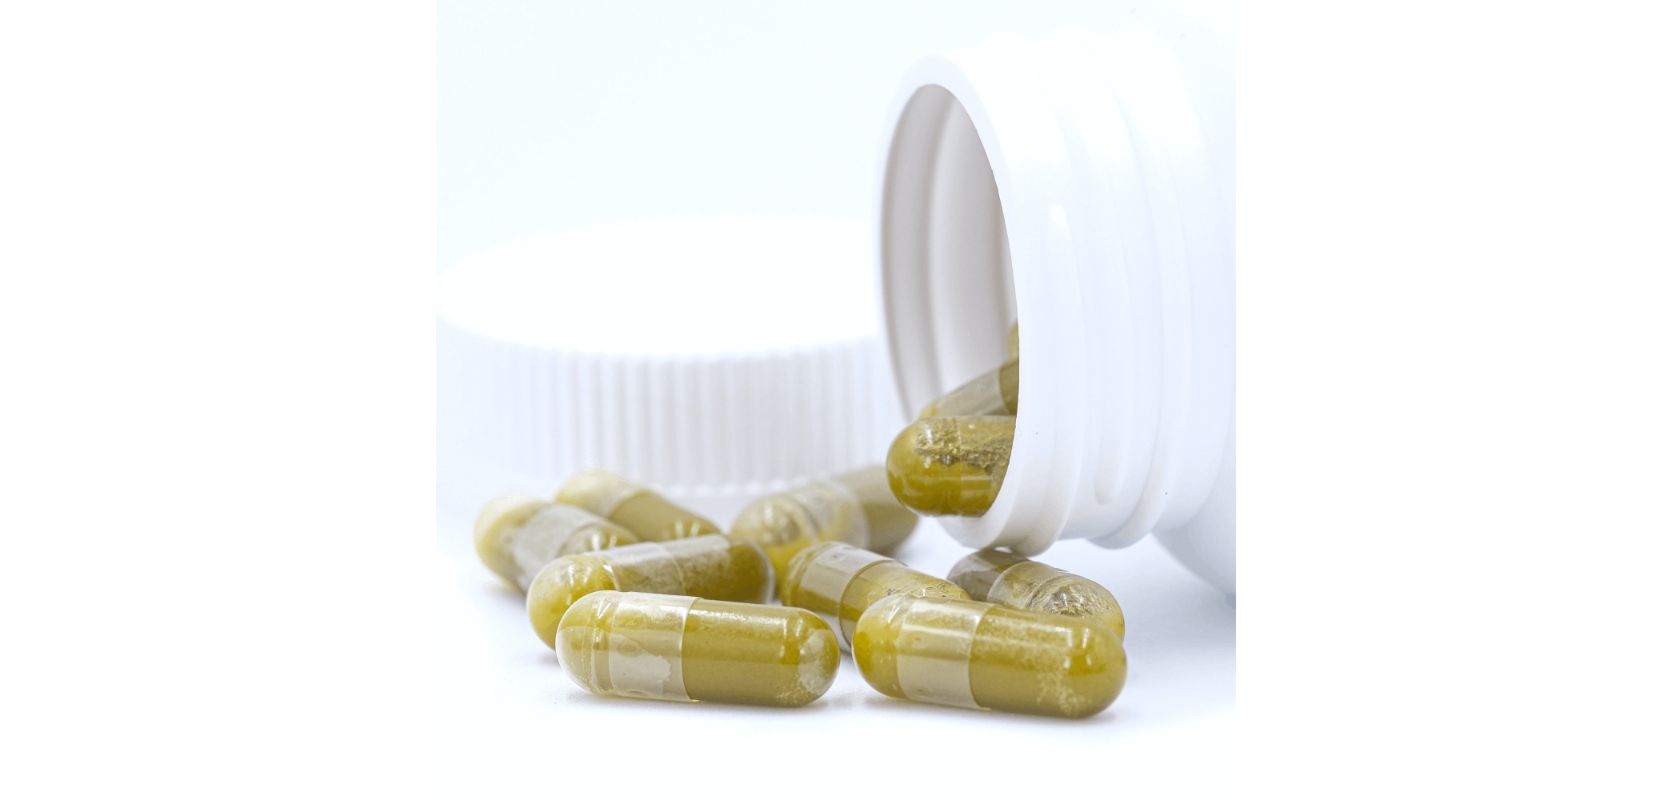 Non-arguably, THC capsules offer a simple, convenient, accurately-dosed way to use cannabis with minimal side effects. 